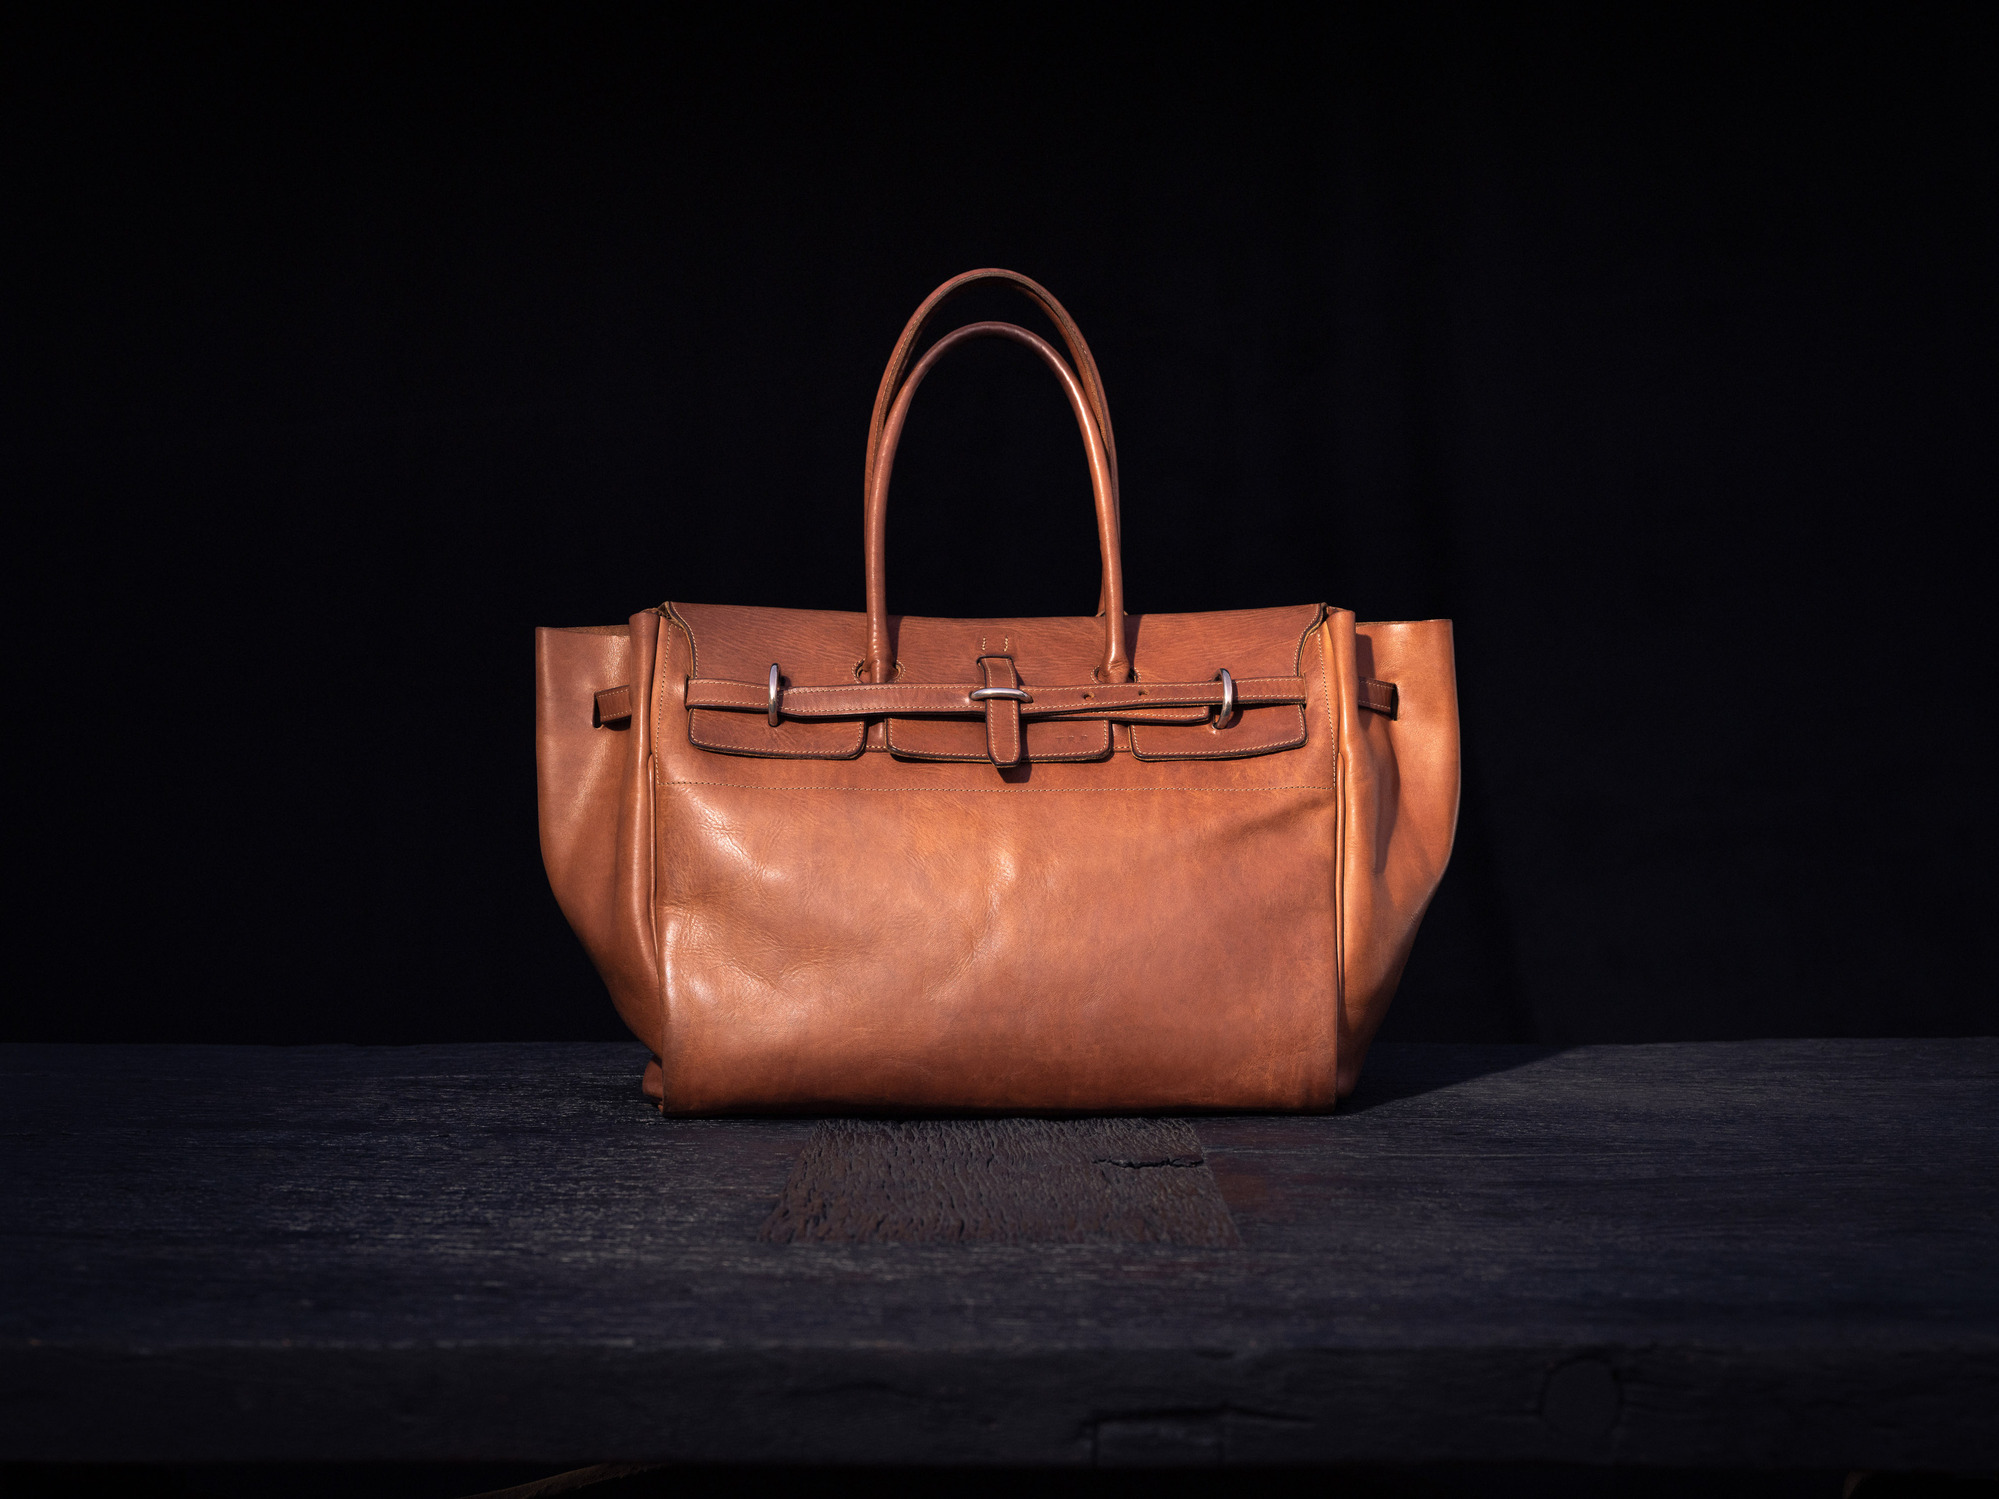 Commercial and advertising product photography for leather goods accessories made by Homer Leather Goods, shot by Los Angeles photographer Timothy Hogan